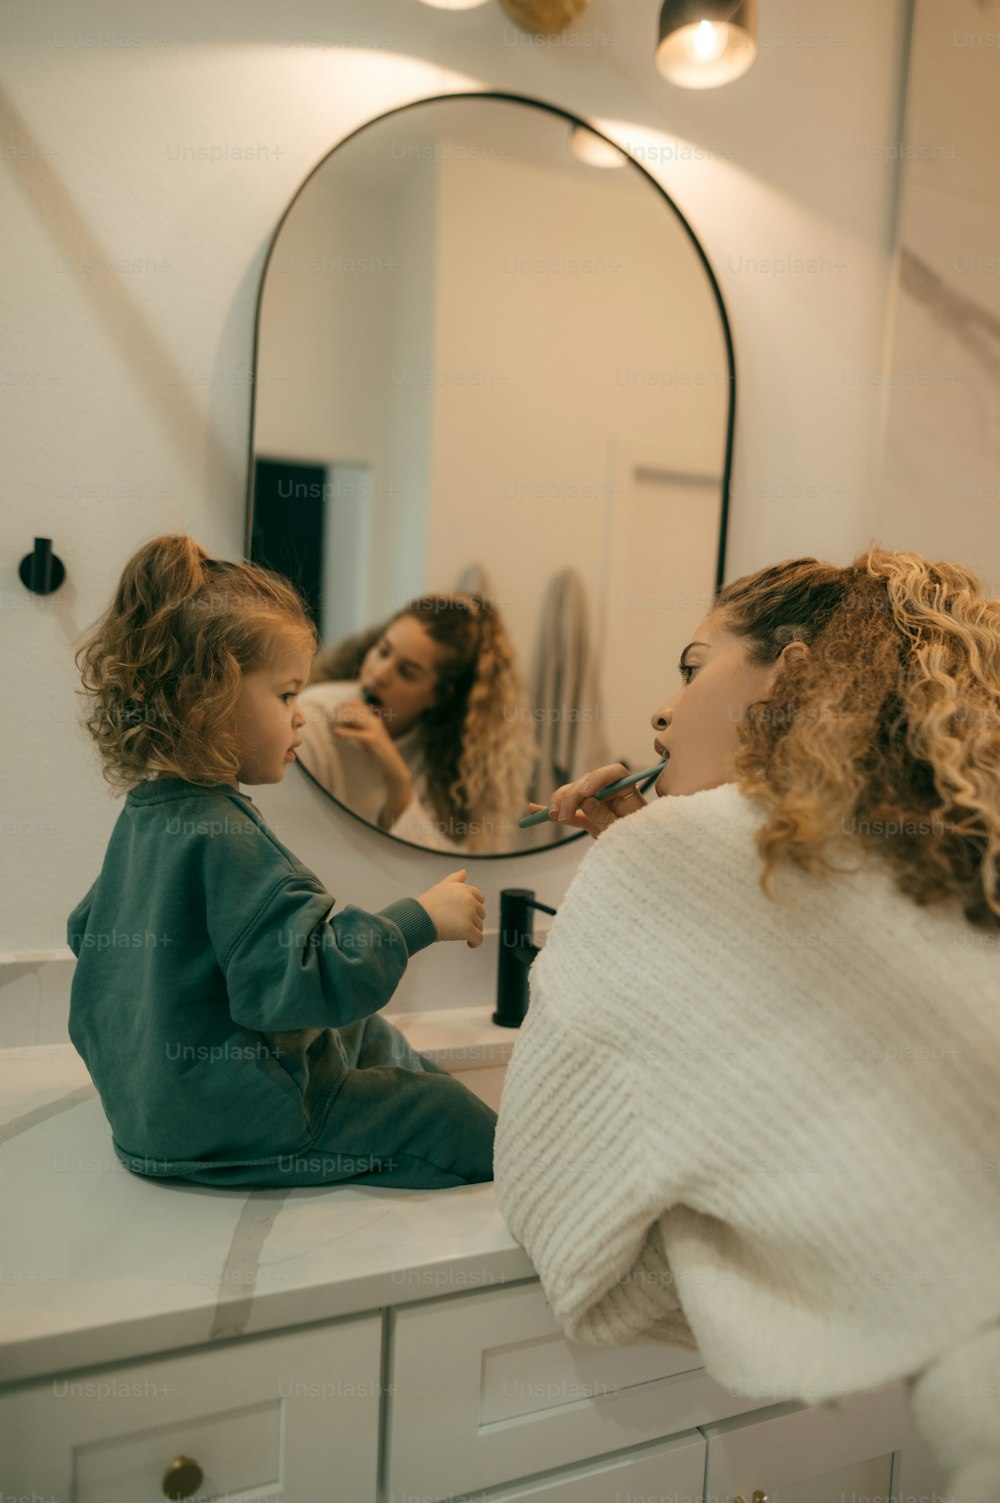 a woman brushing a child's teeth in front of a mirror